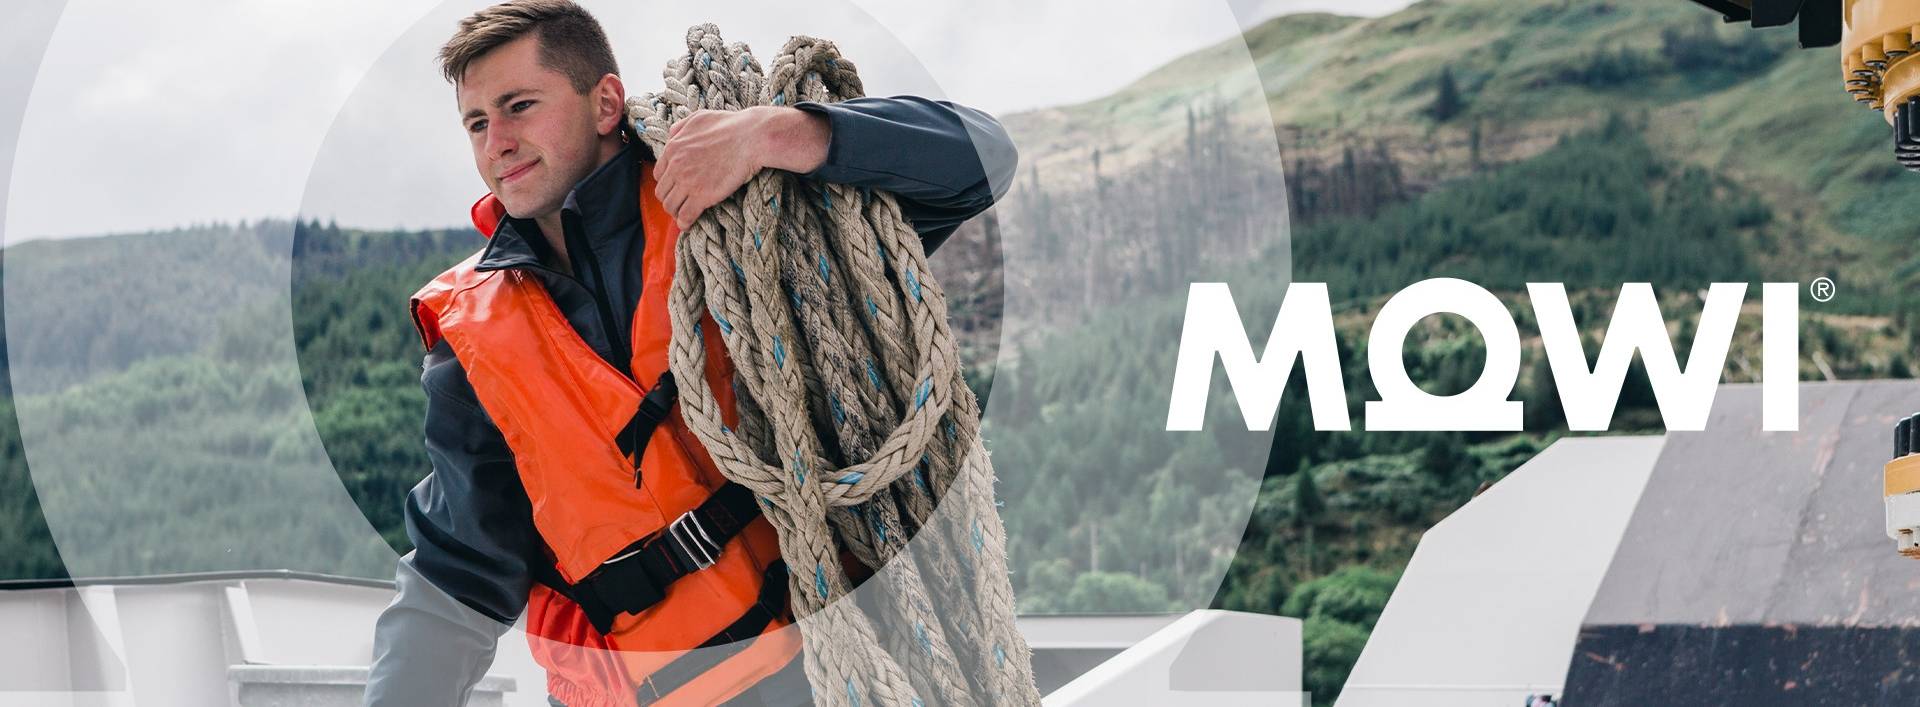 Mowi poster with a man wearing a lifejacket holding some rope